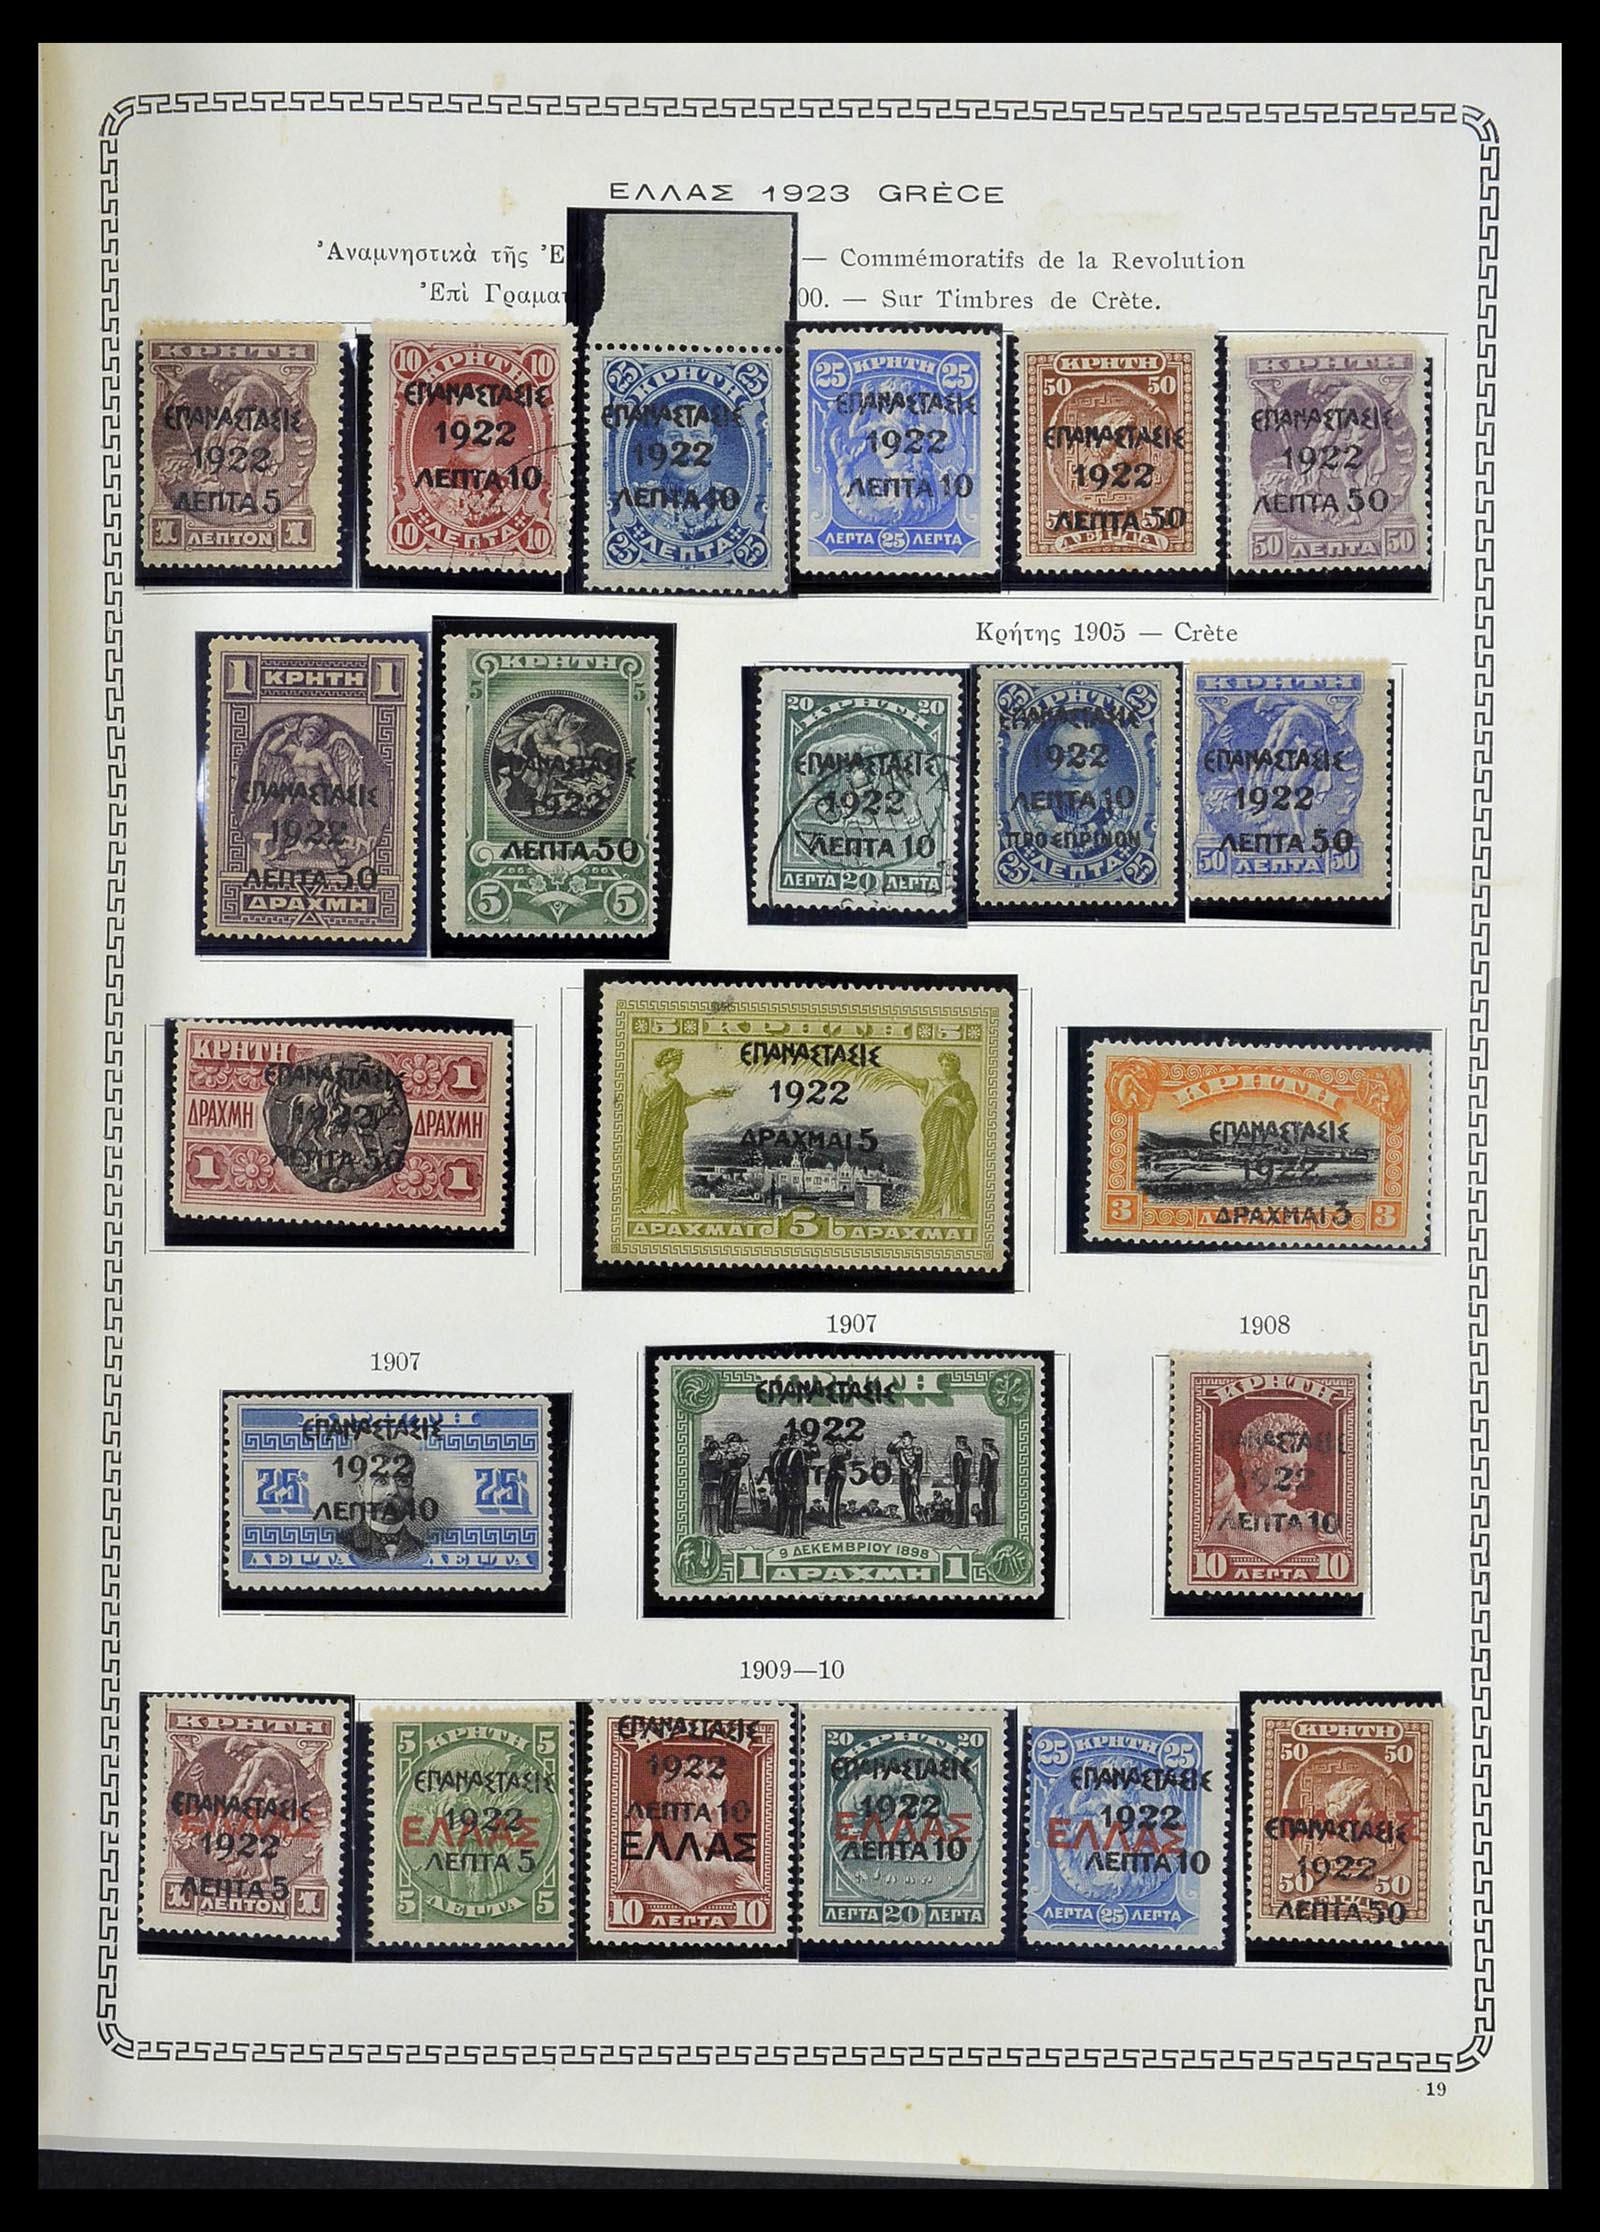 34245 020 - Stamp collection 34245 Greece and territories 1861-1940.